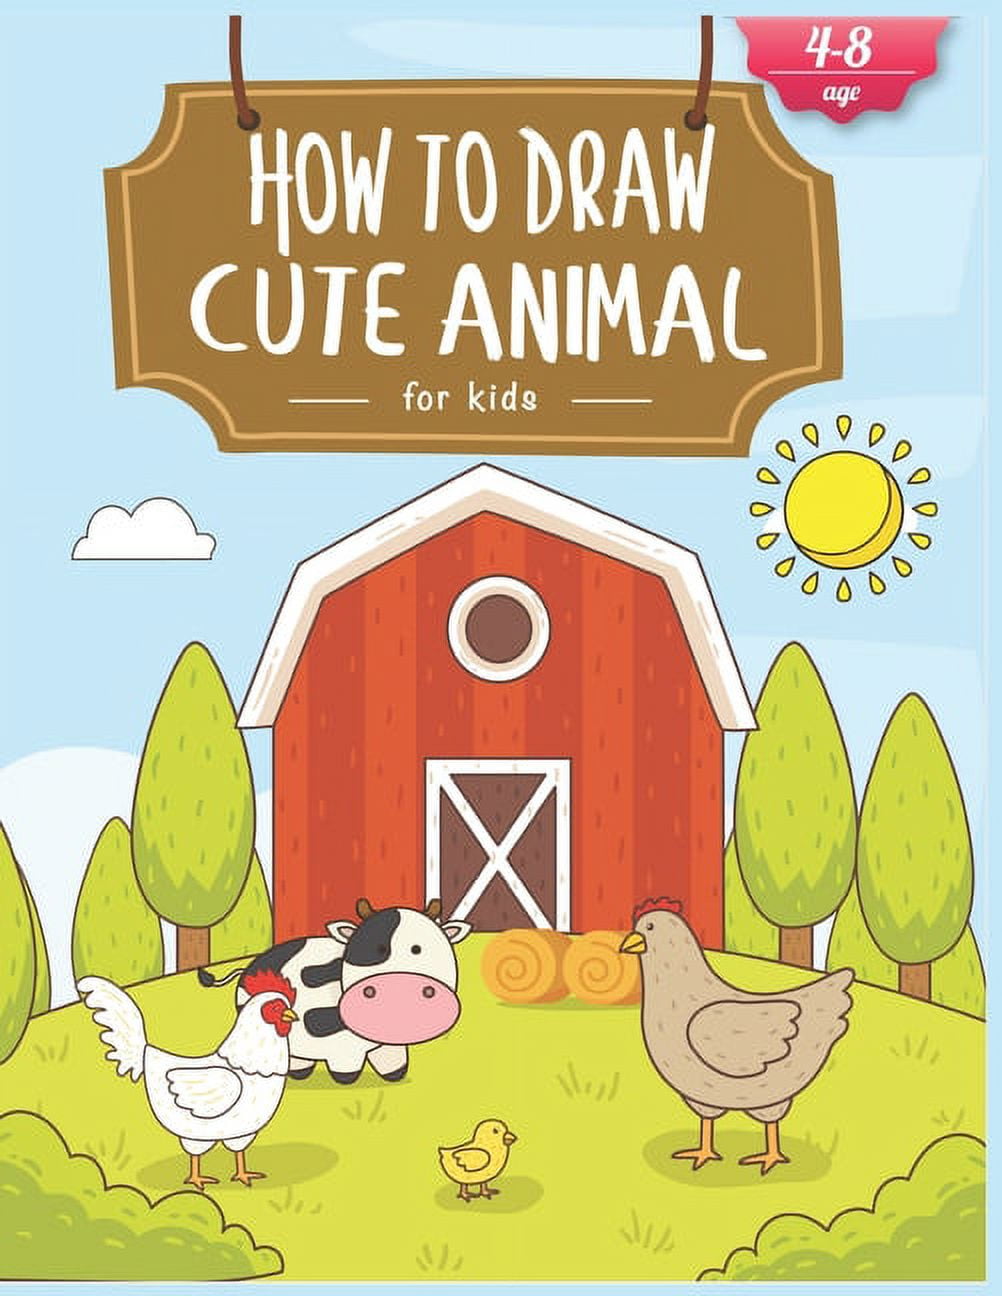 I can Draw Cute Animals: Easy & Fun Drawing Book for Kids Age 6-8 (Activity  Book for Kids to Learn to Draw Cute Stuff #1)